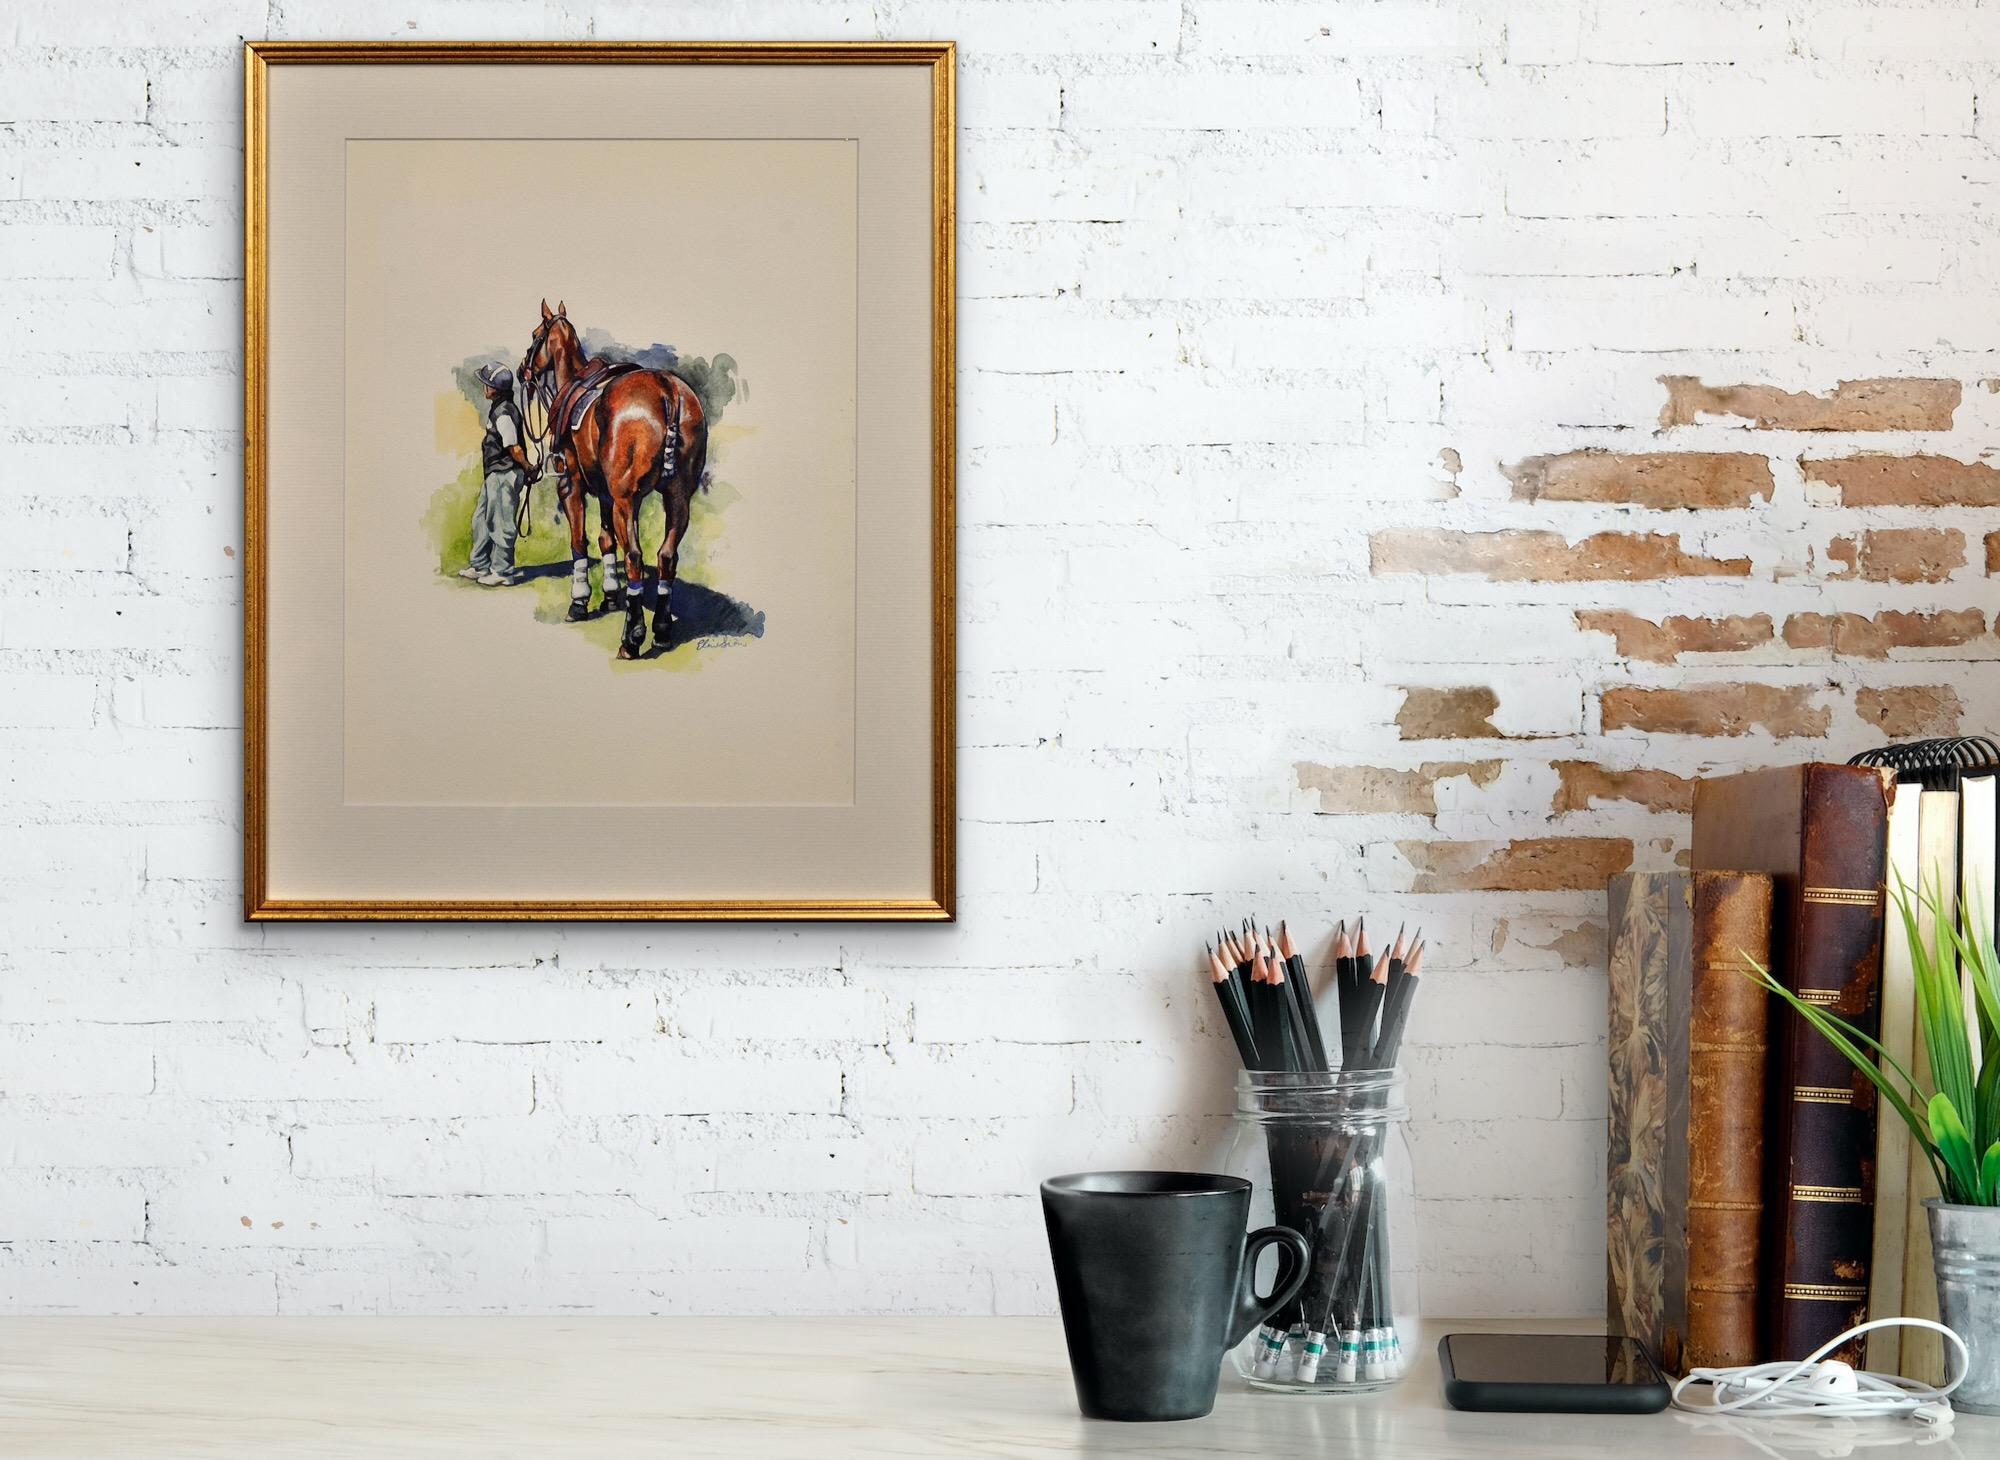 Polo Match, Cirencester, Player and Pony. Cotswolds. Parkland. Framed Watercolor For Sale 15